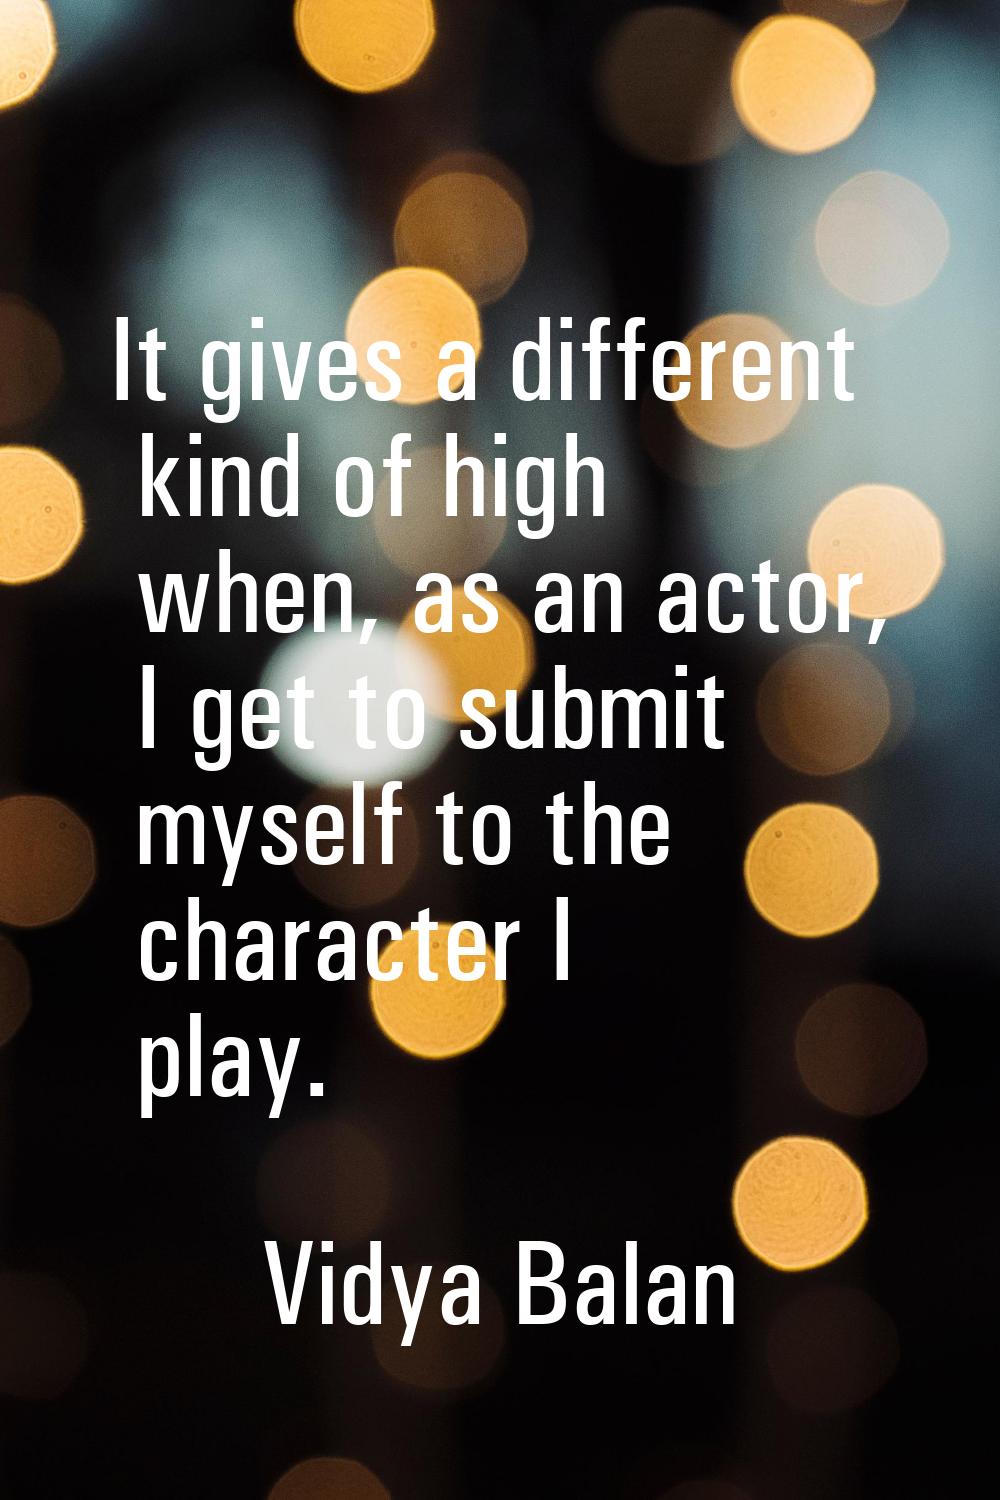 It gives a different kind of high when, as an actor, I get to submit myself to the character I play